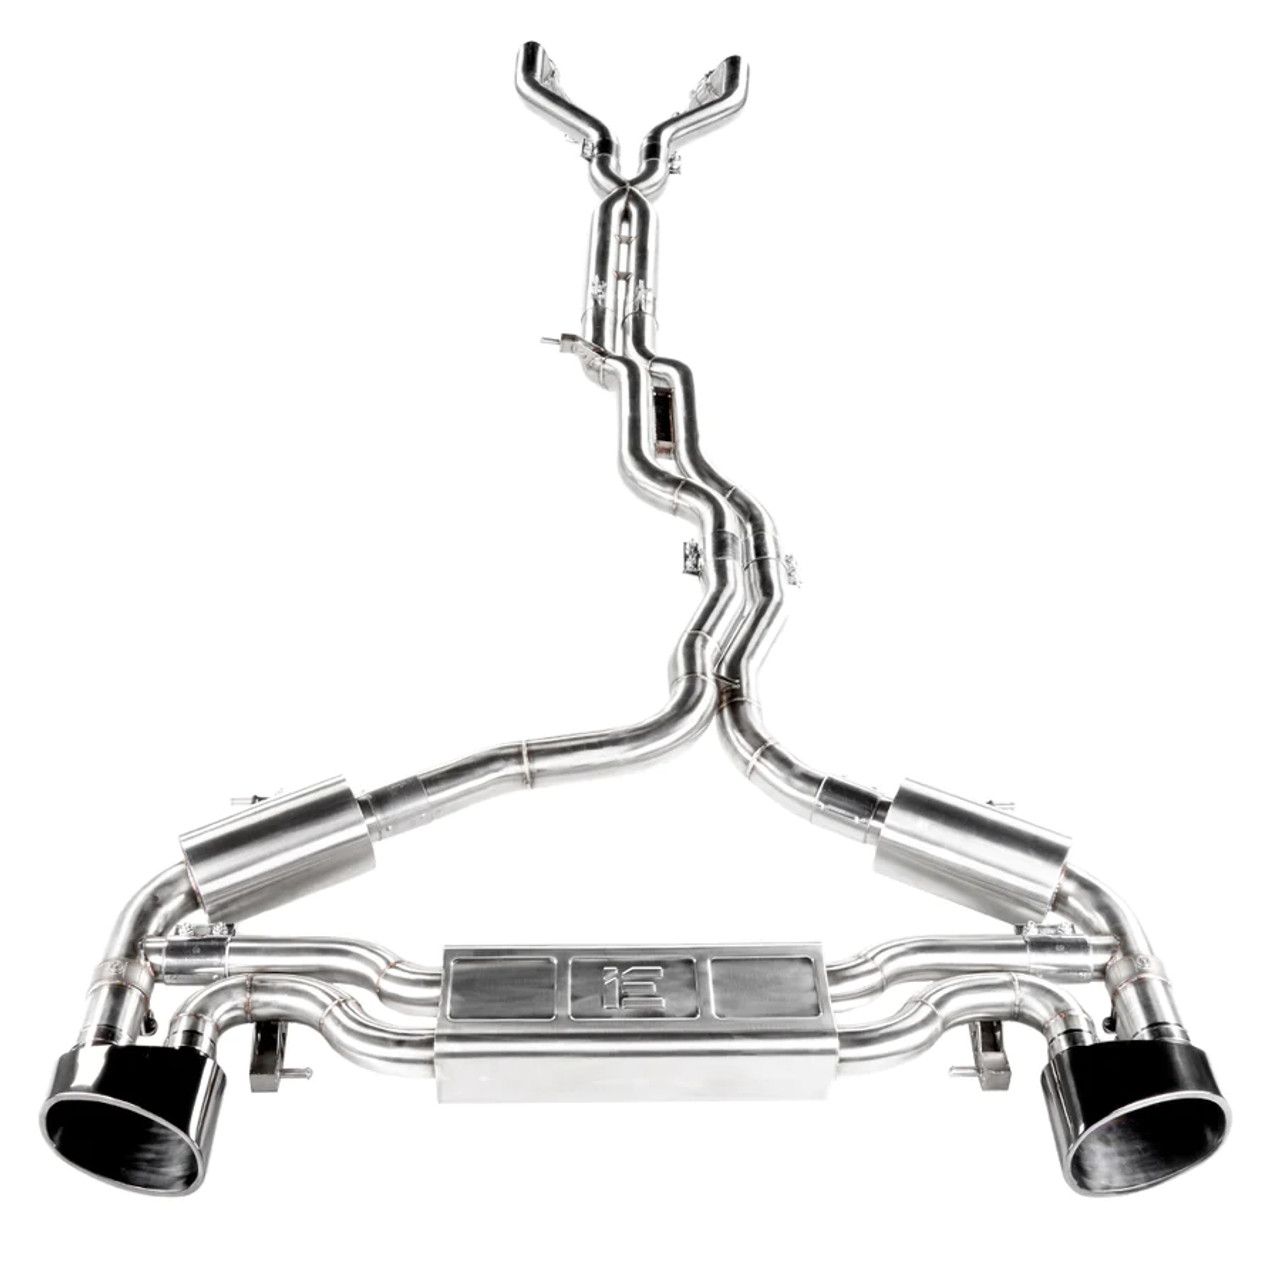 IE Catback Exhaust System for C8 RS6 & RS7